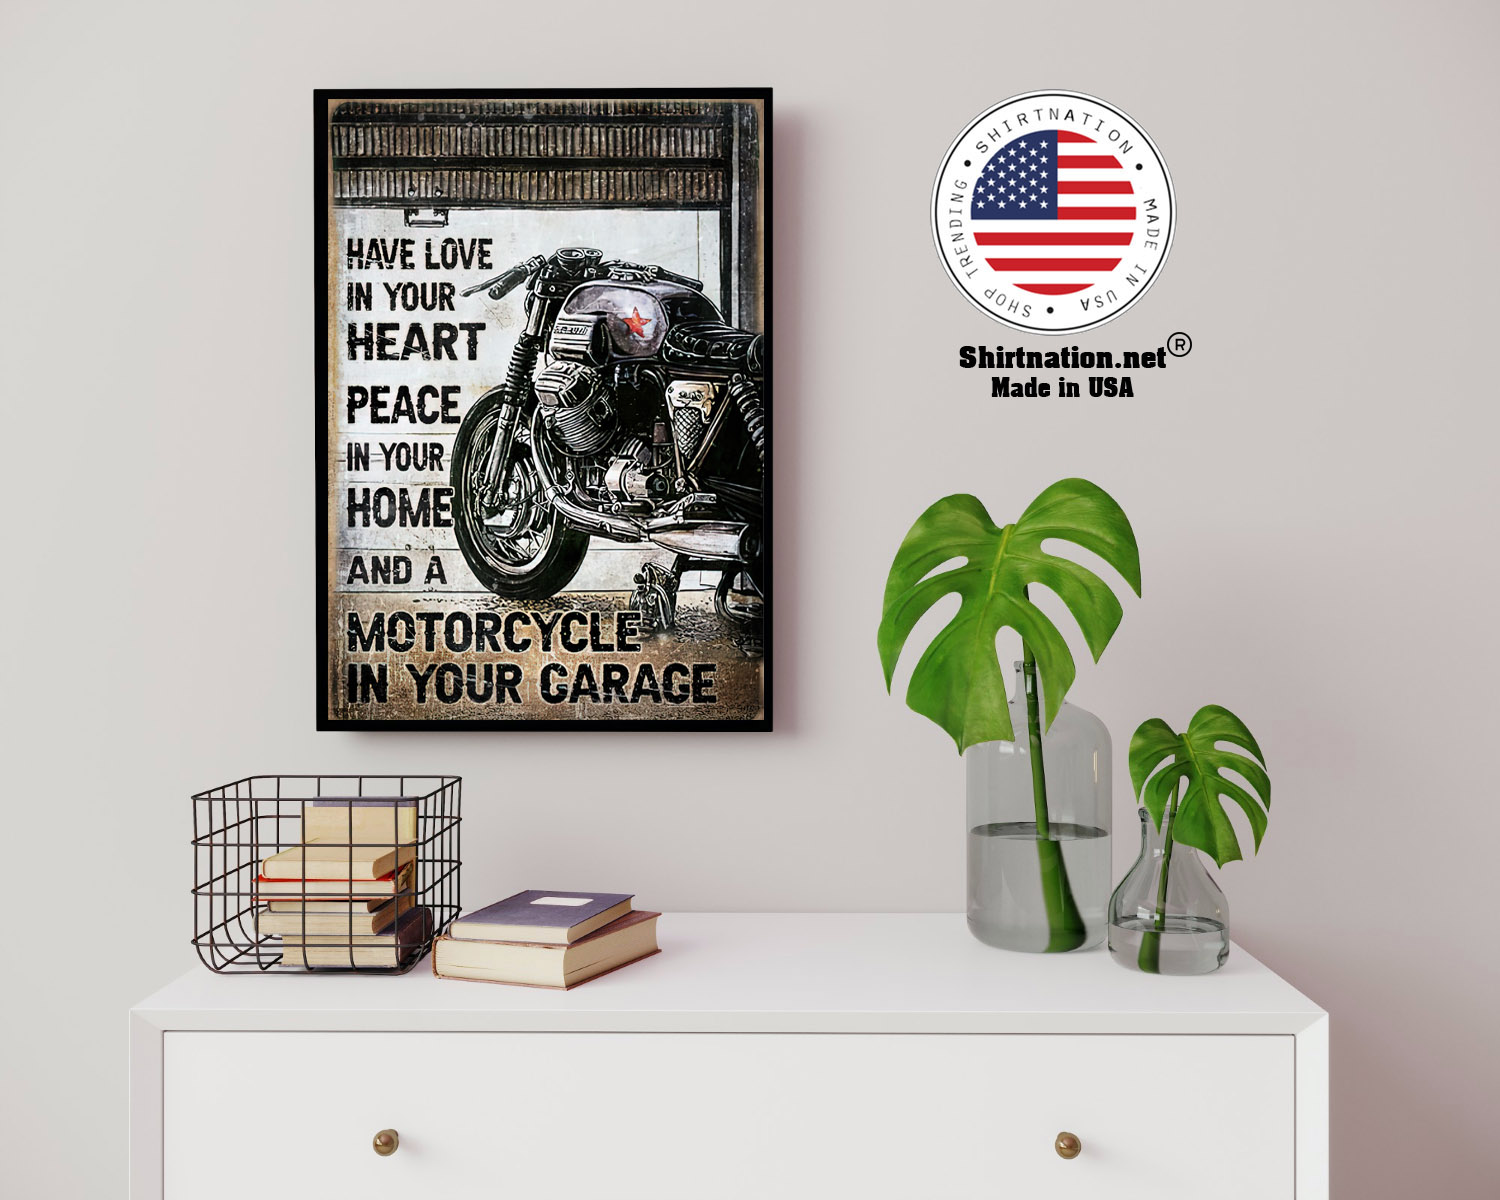 Have love in your heart peace in your home and a motorcycle in your garage poster 14